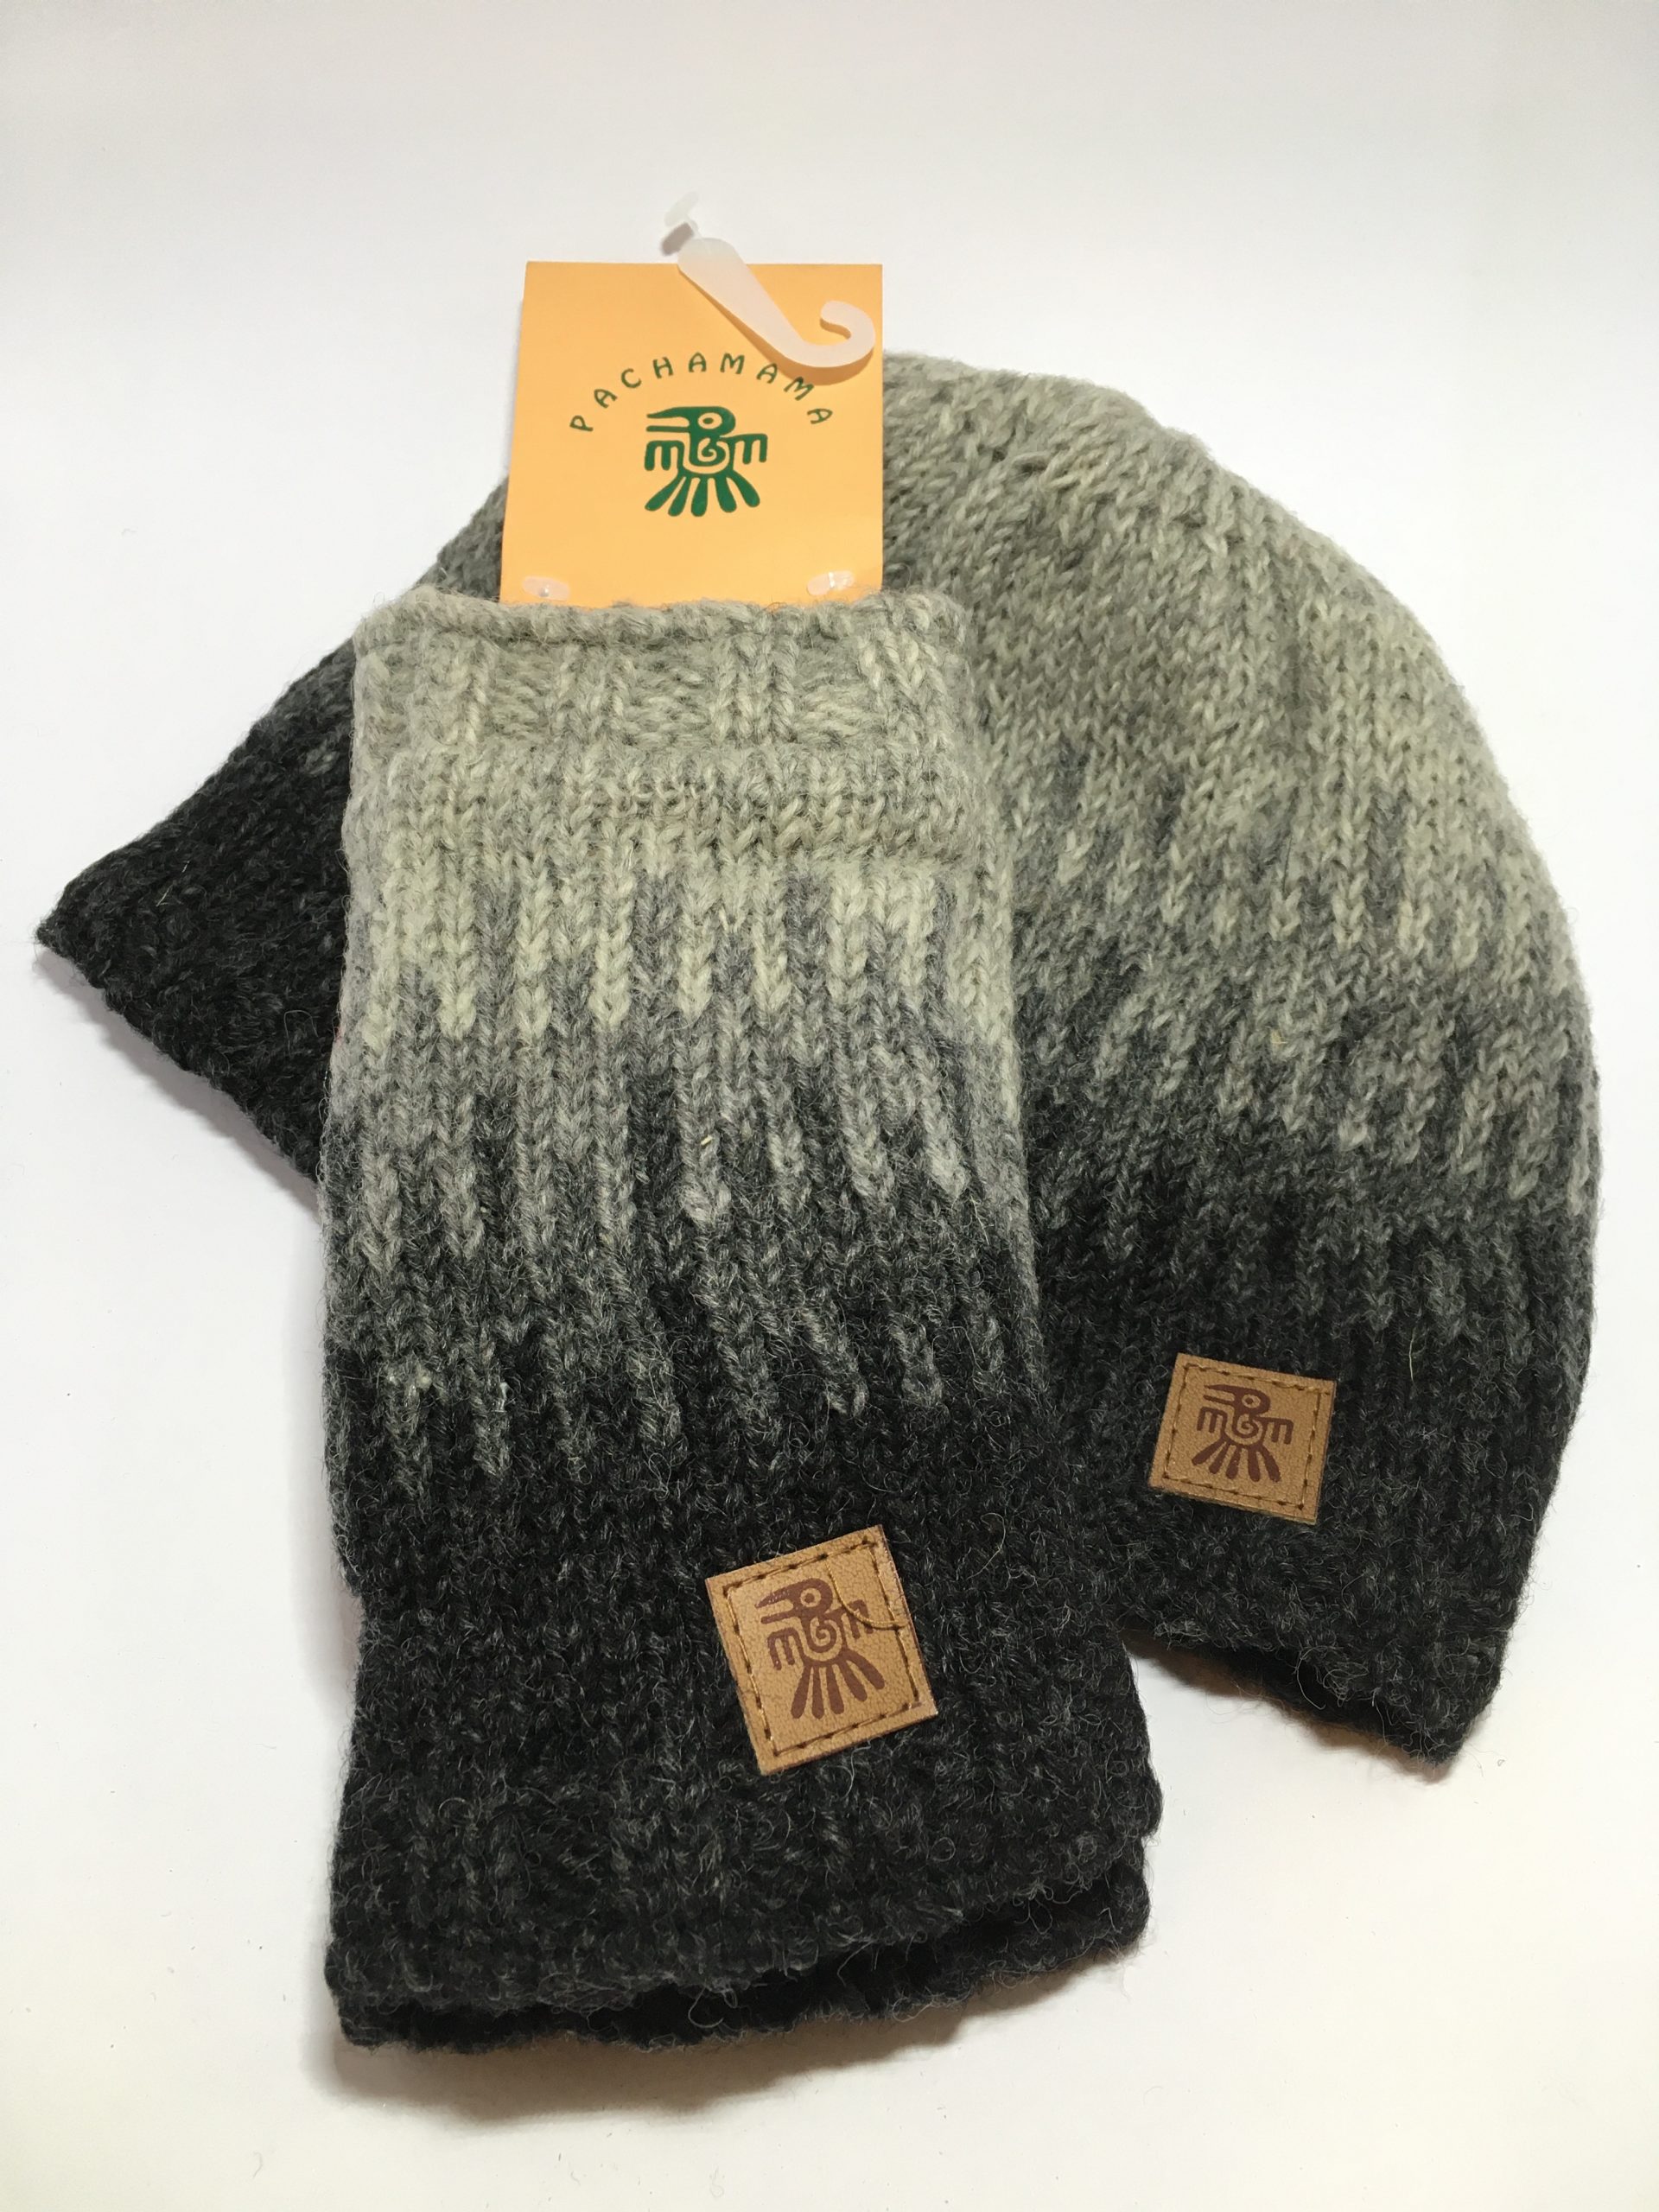 Pachamama-MENS-hat-and-handwarmers - Cinderford Churches